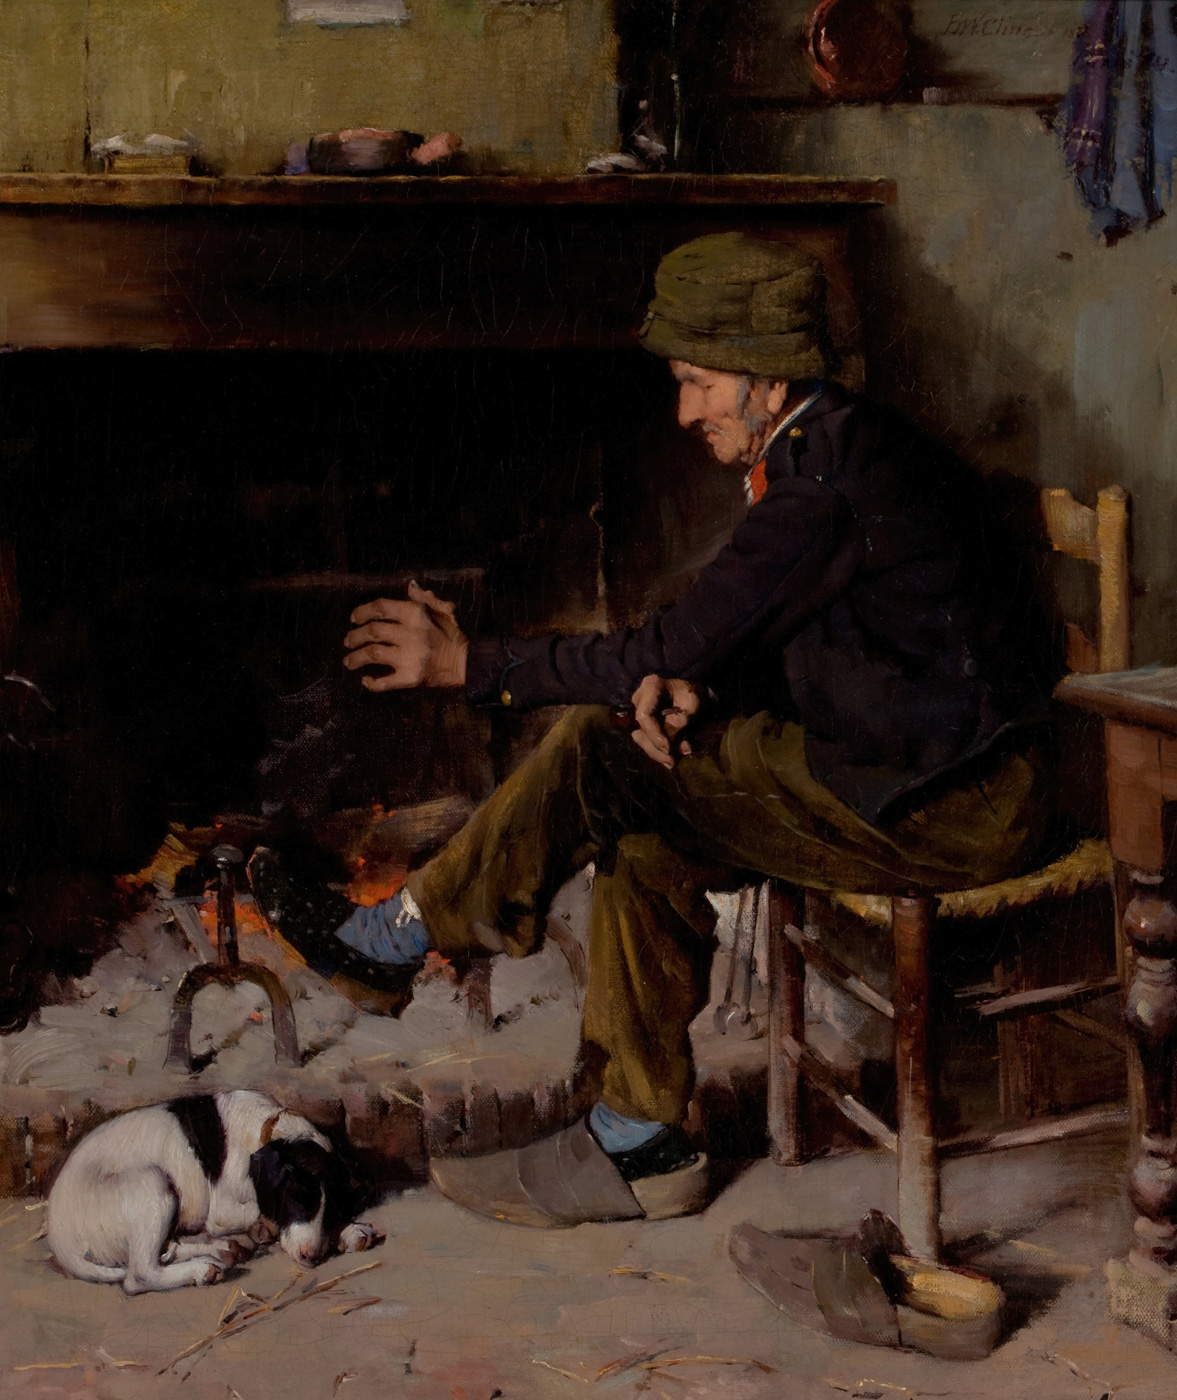 Man with his Dog before a Hearth by Benjamin West Clinedinst. Oil on canvas. 1884.